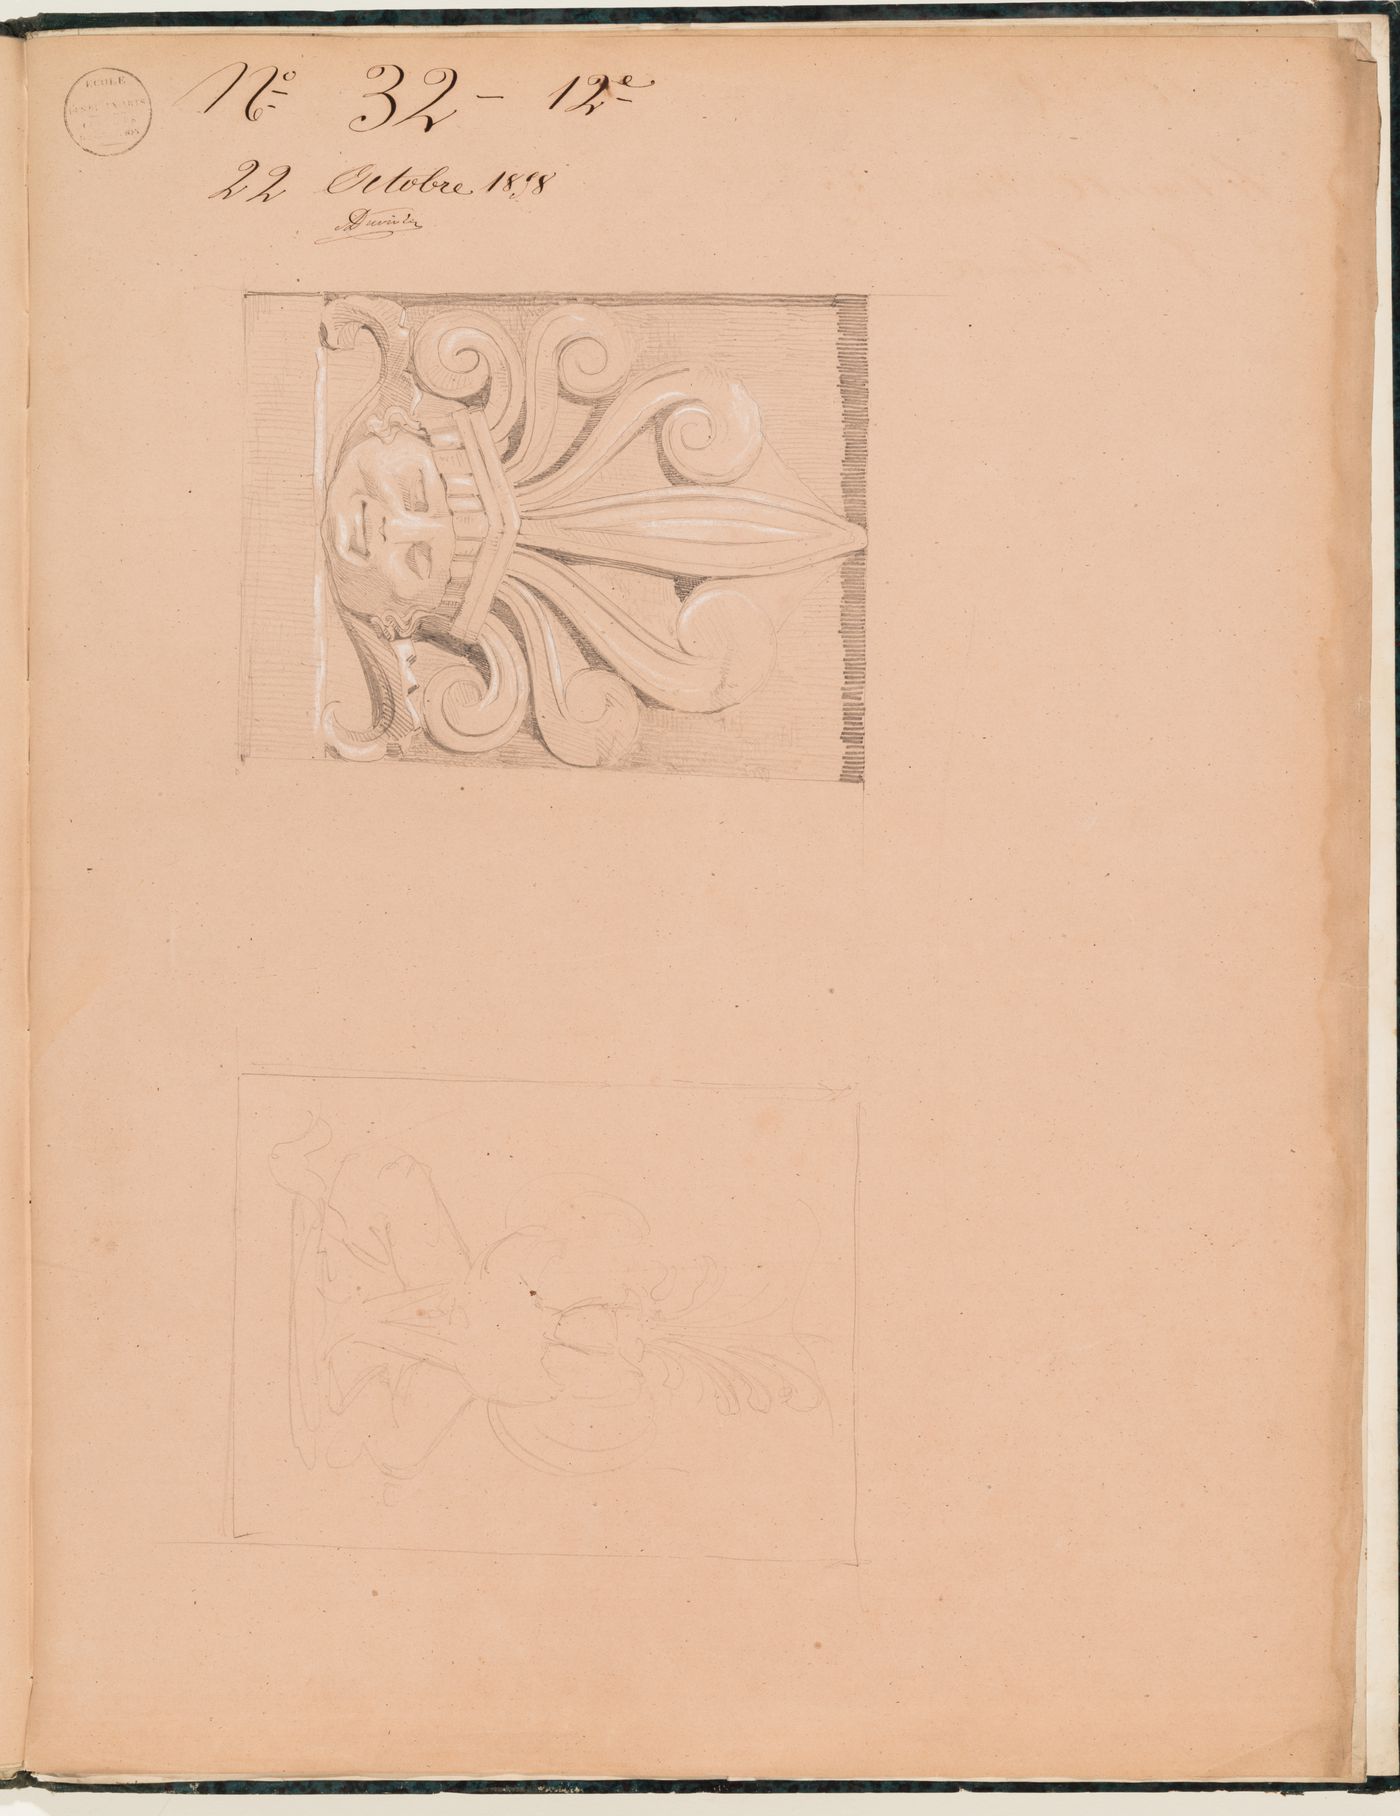 Concours d'émulation entry, 22 October 1858: Study of a head with an anthemion crown, possibly from a soffit